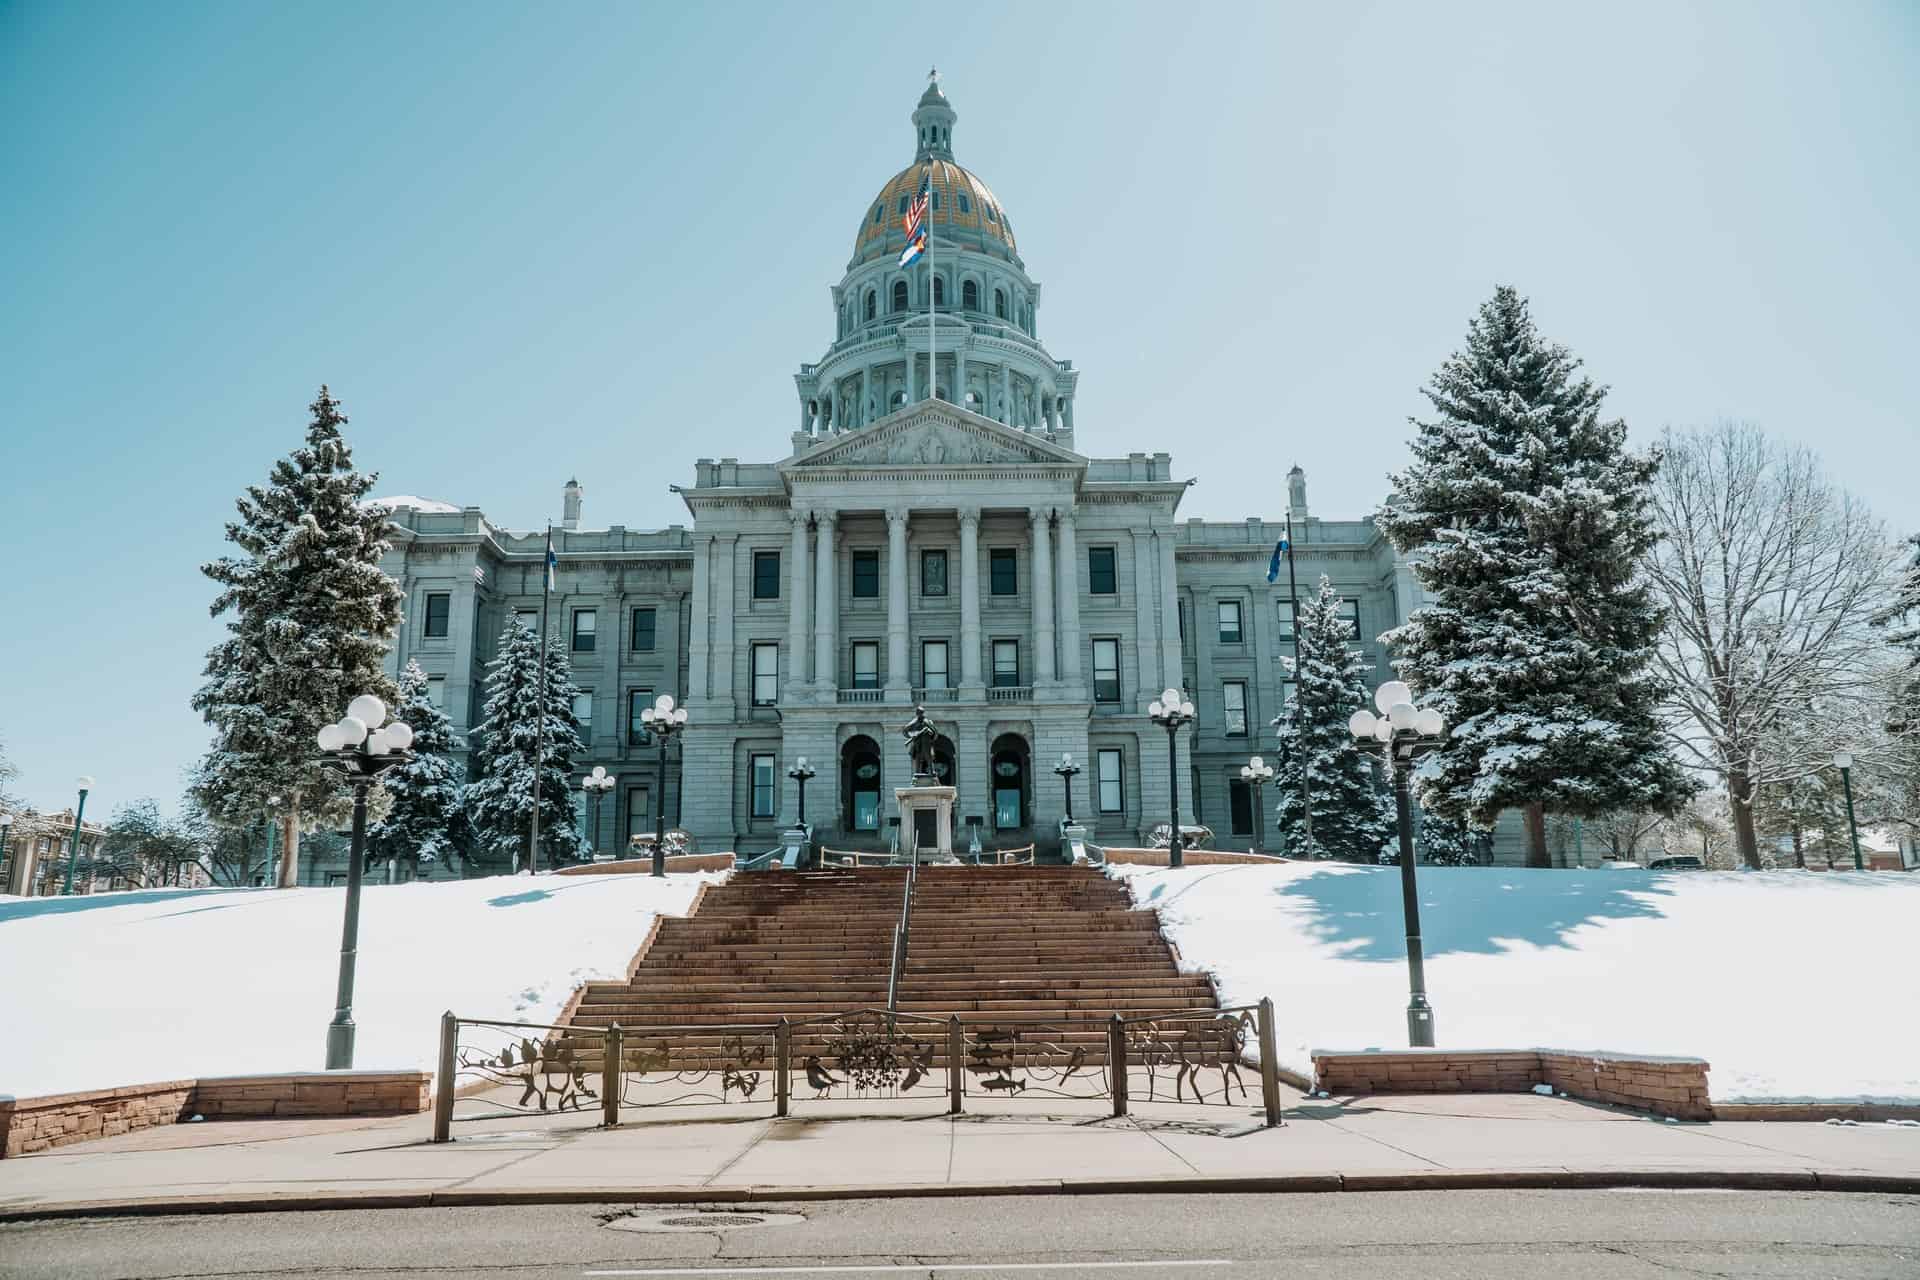 Best things to do in Denver Colorado - Mitch Krayton - Colorado State Capitol Building photo by Shelby Ireland on Unsplash